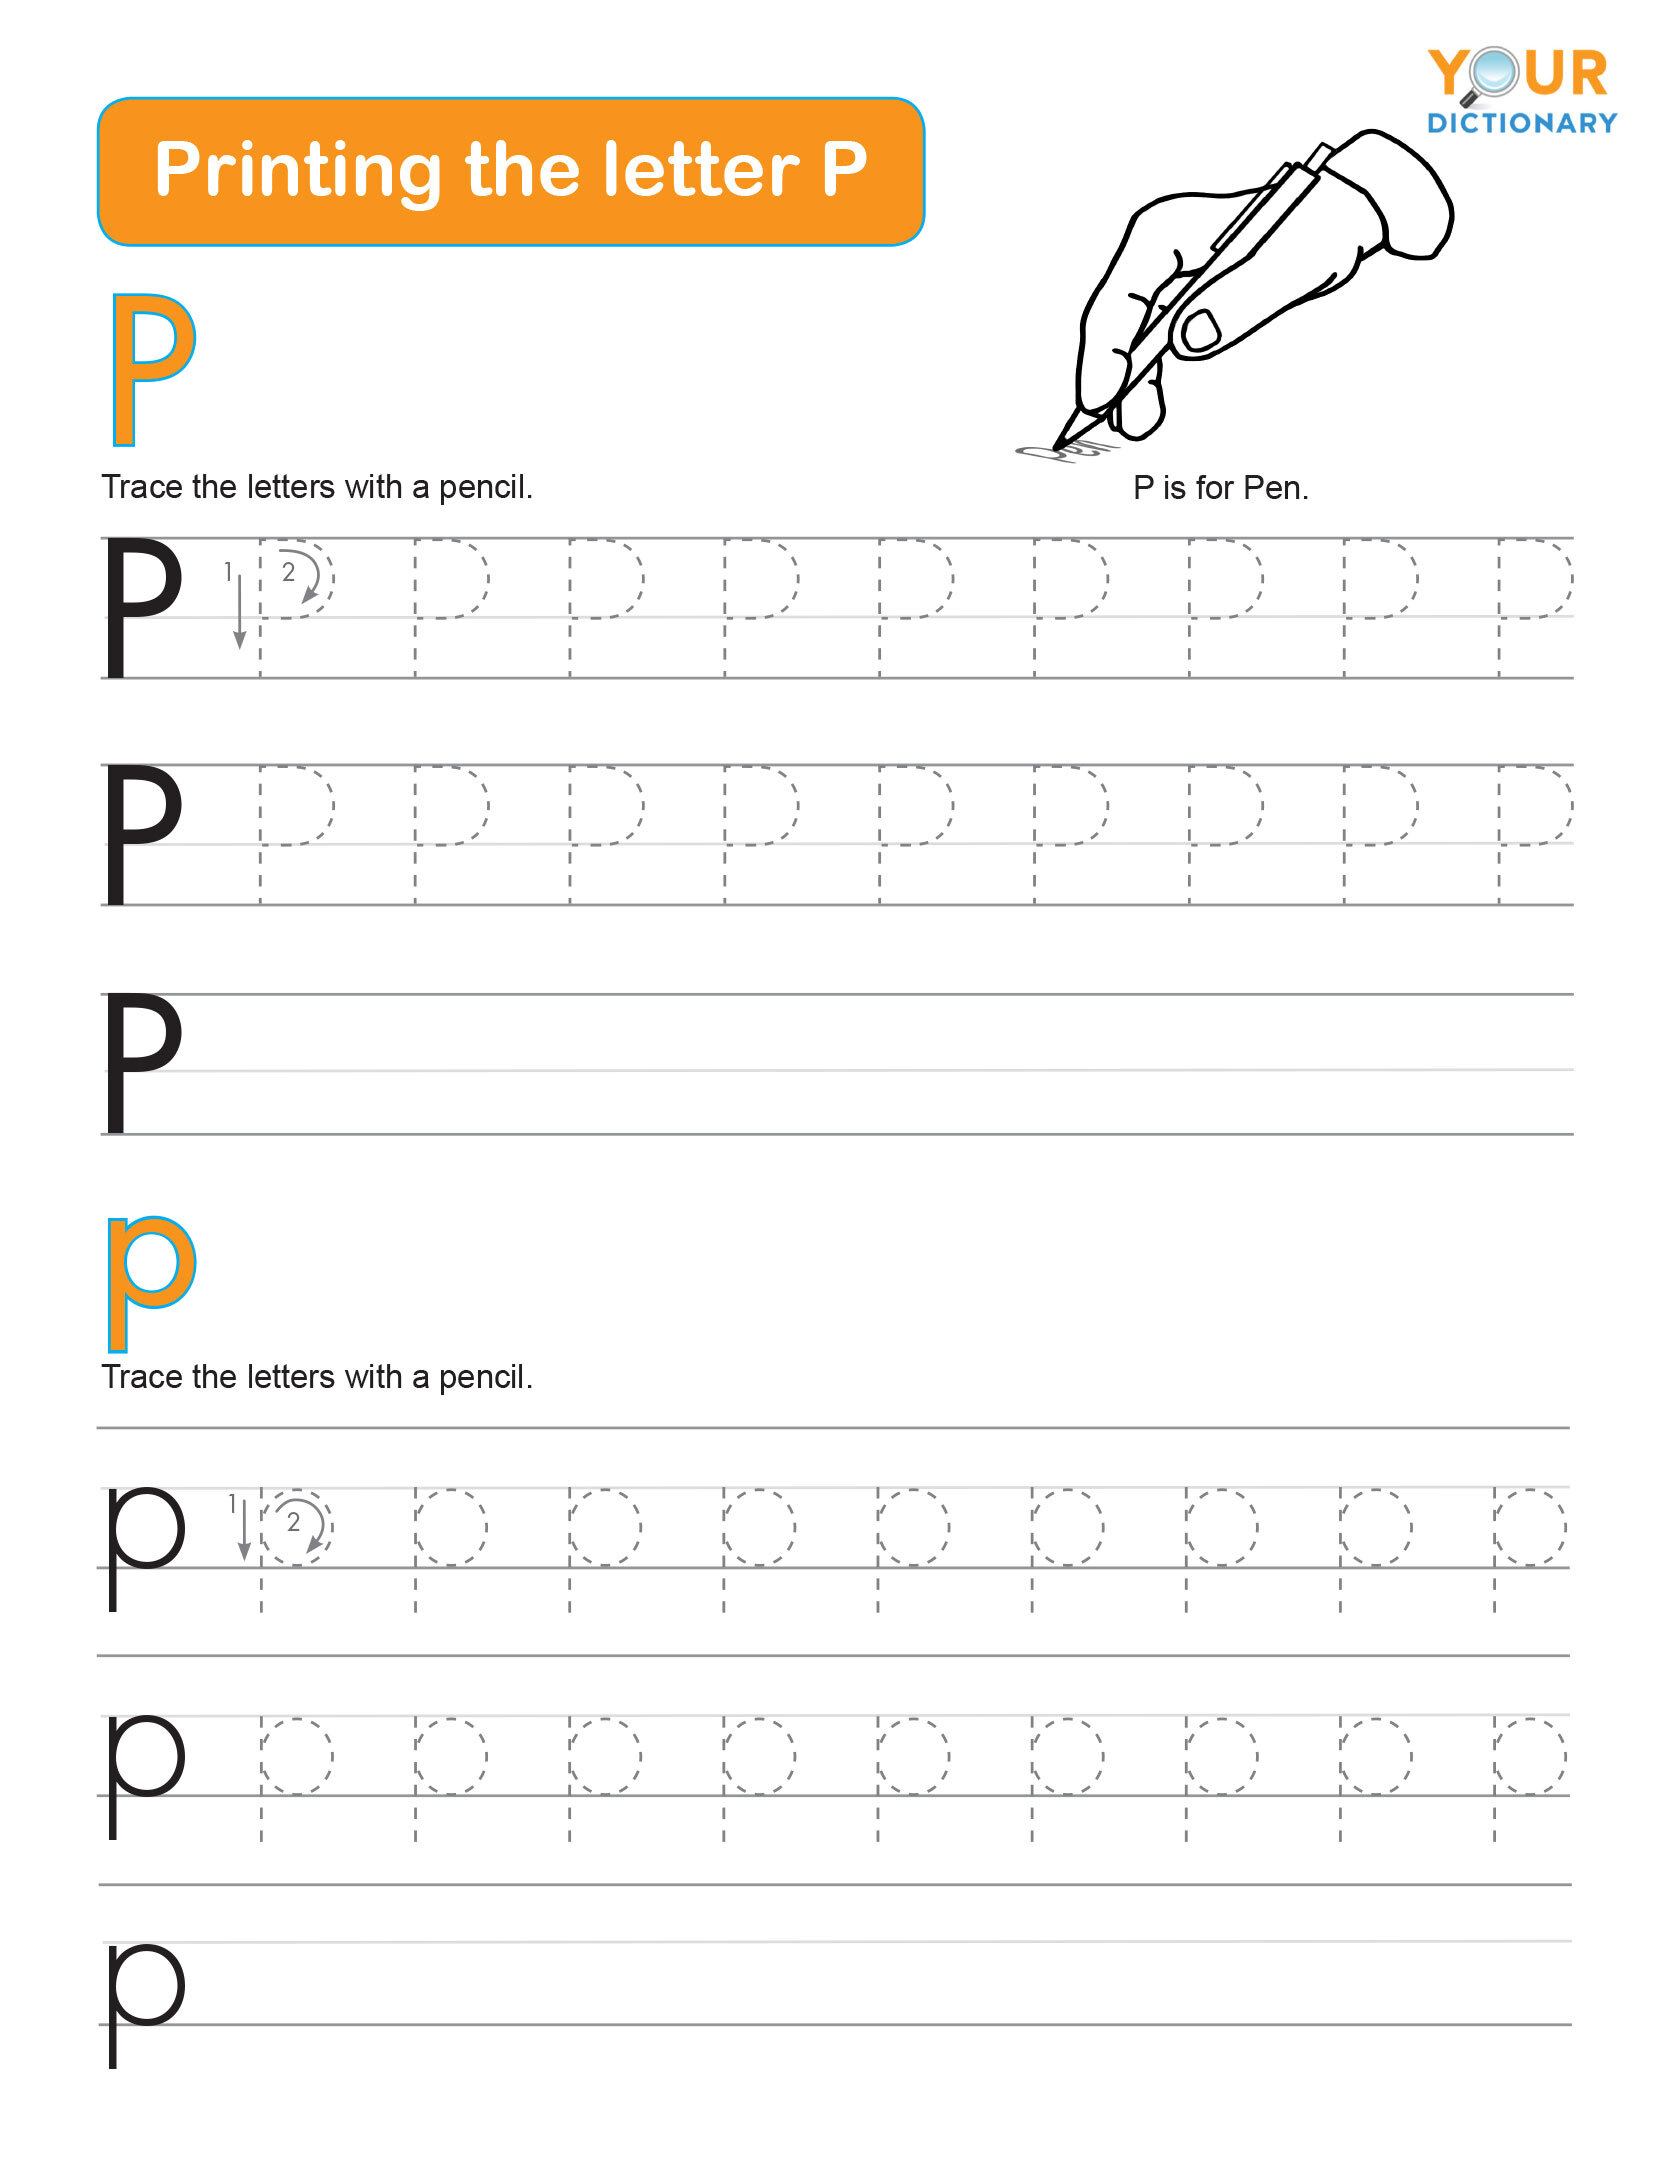 tracing the letter p activity